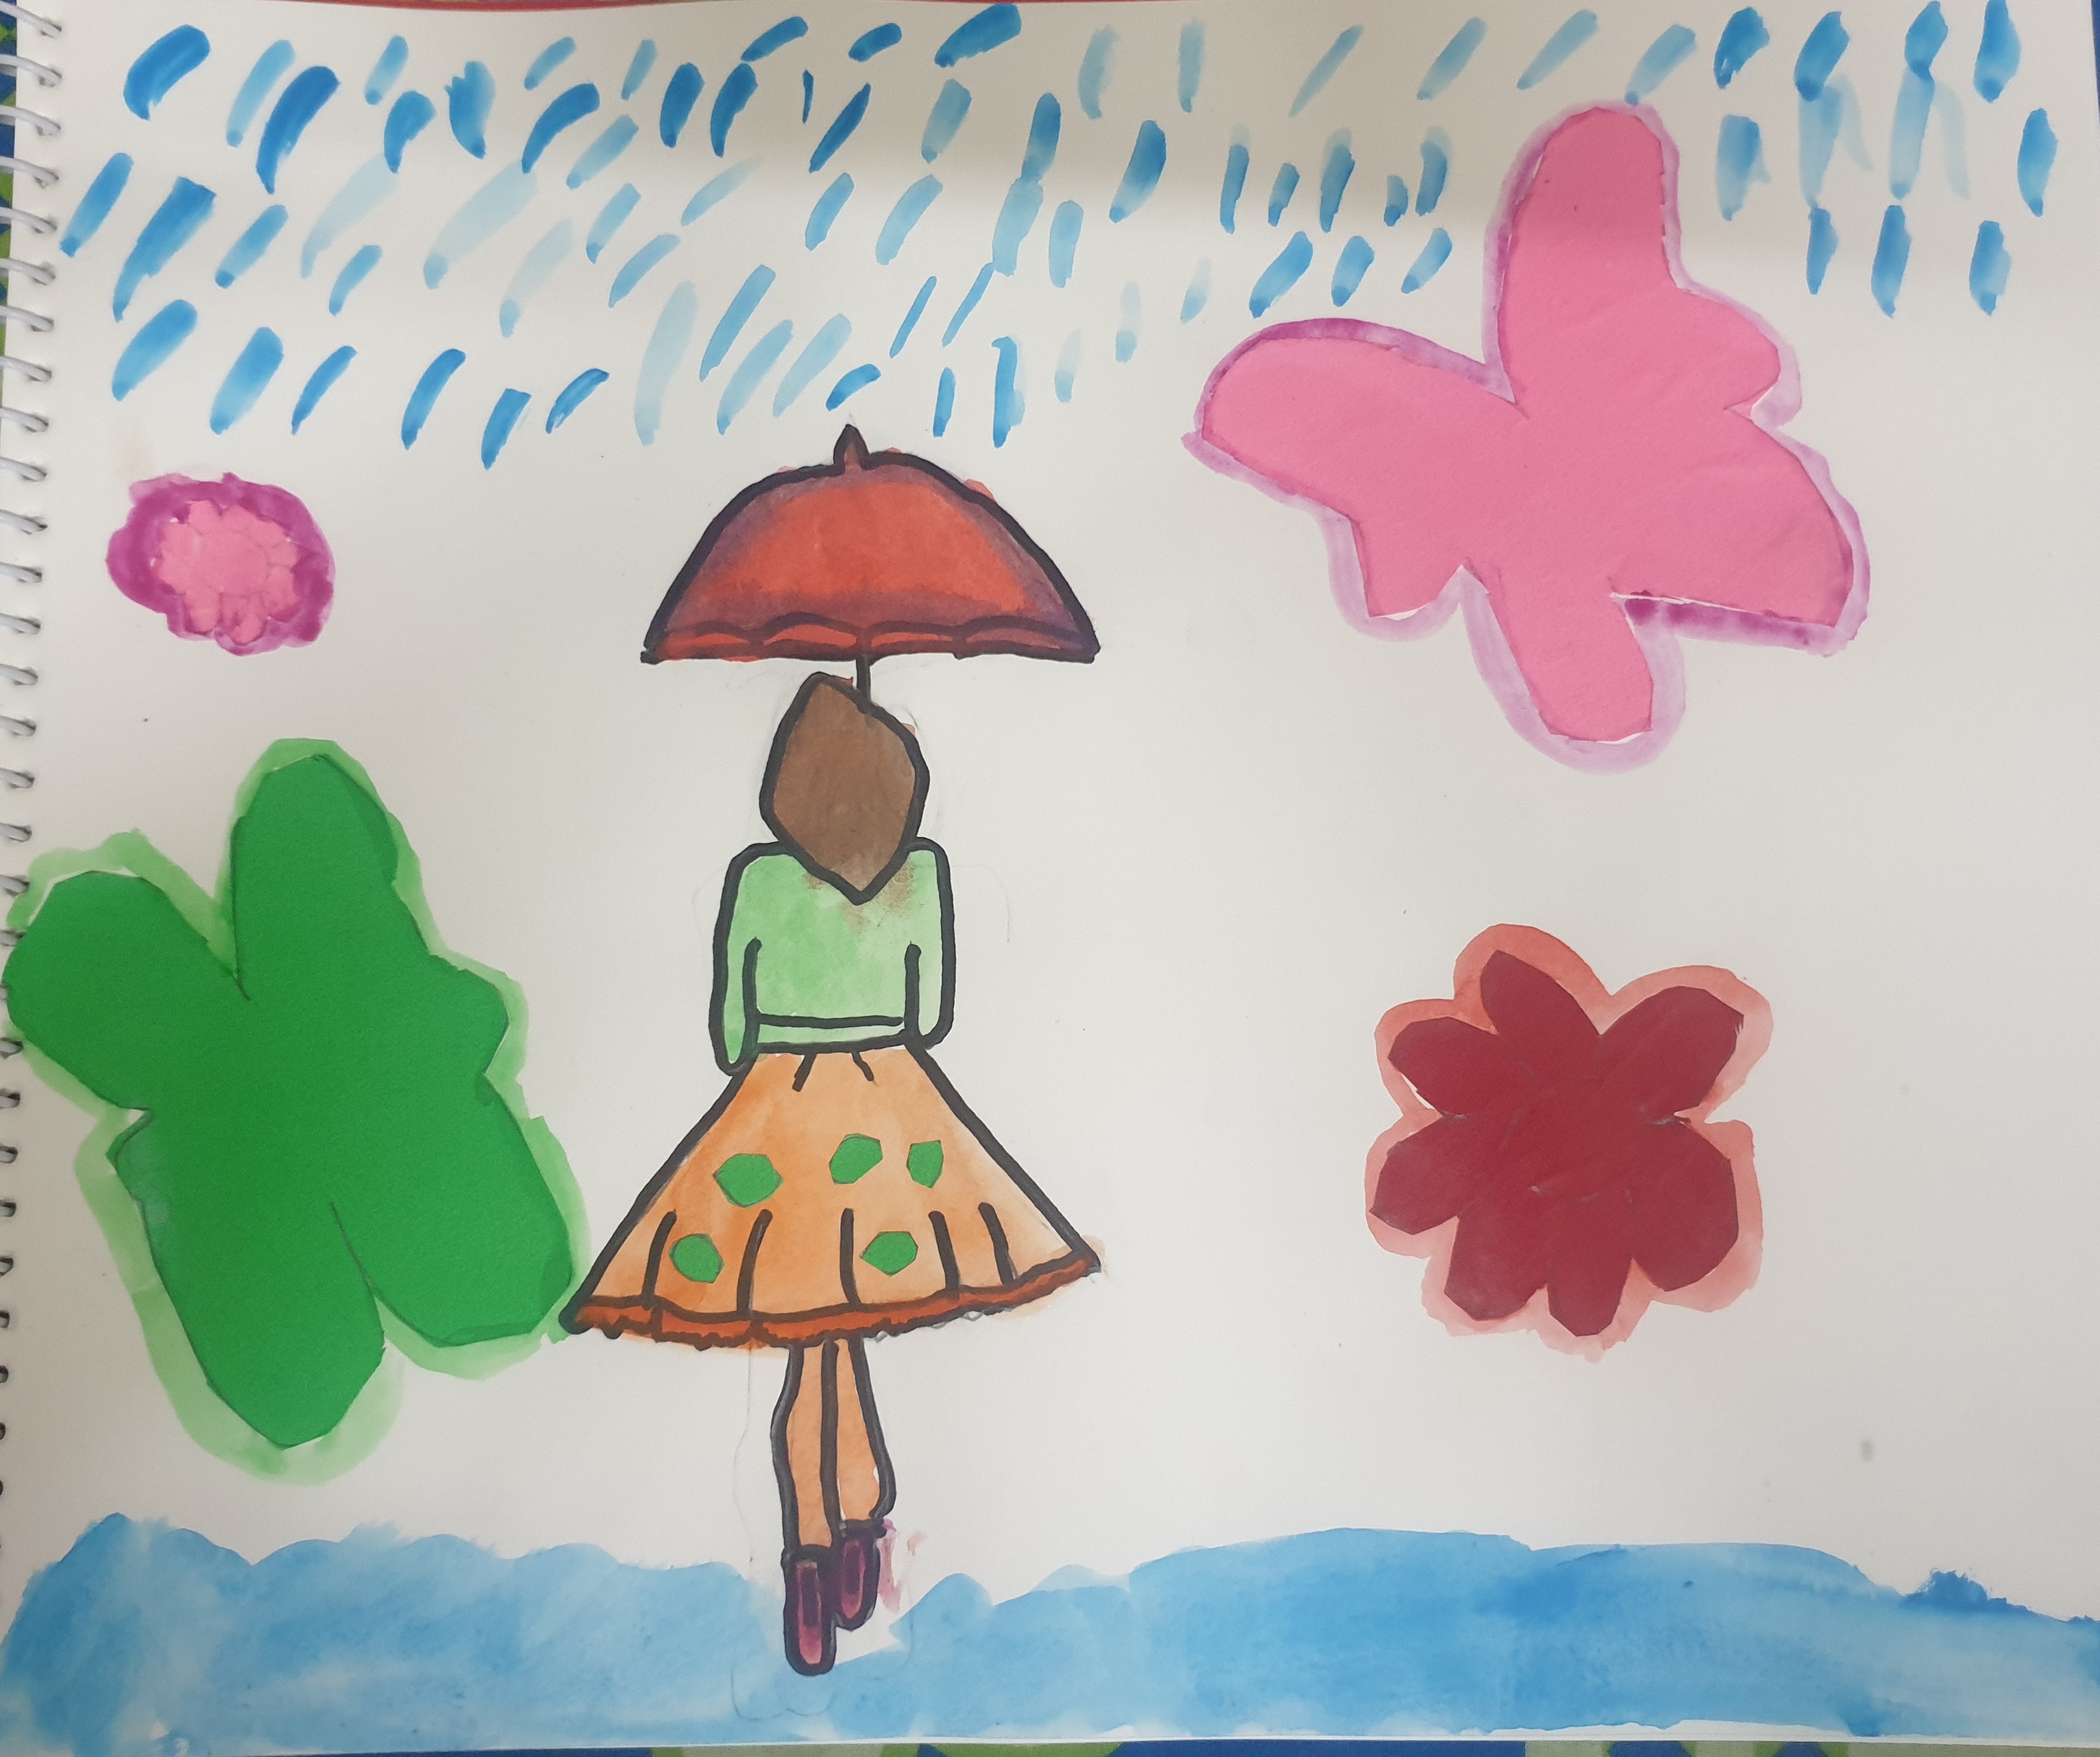 How to draw scenery of rainy season | Easy school project drawing for kids  - YouTube